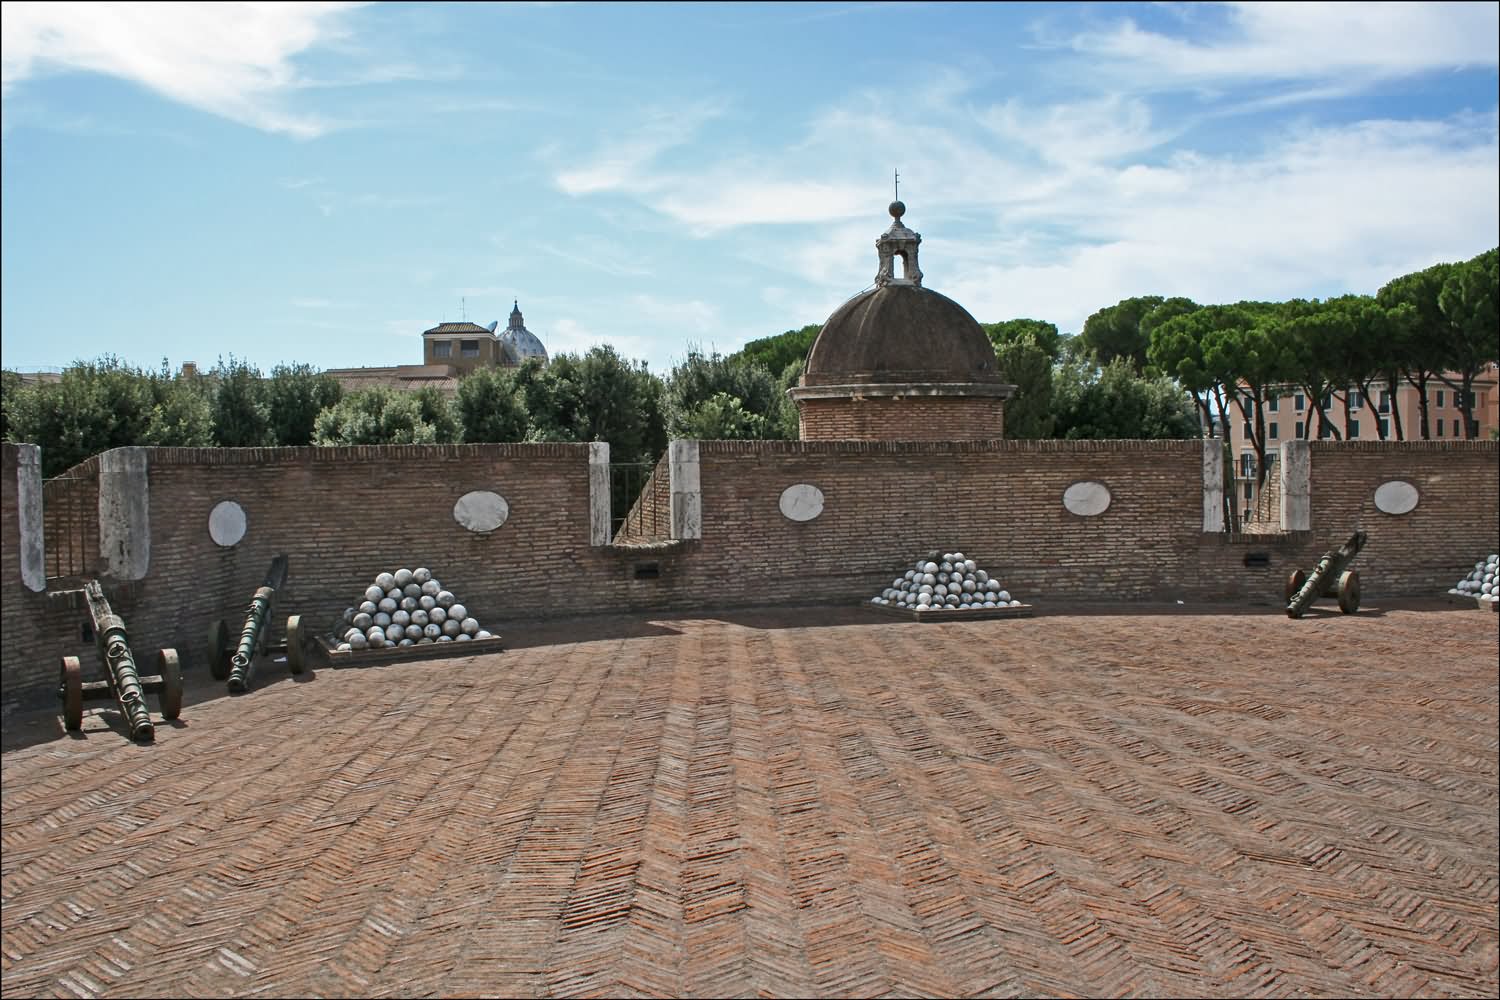 Roof Of The Castel Sant'Angelo